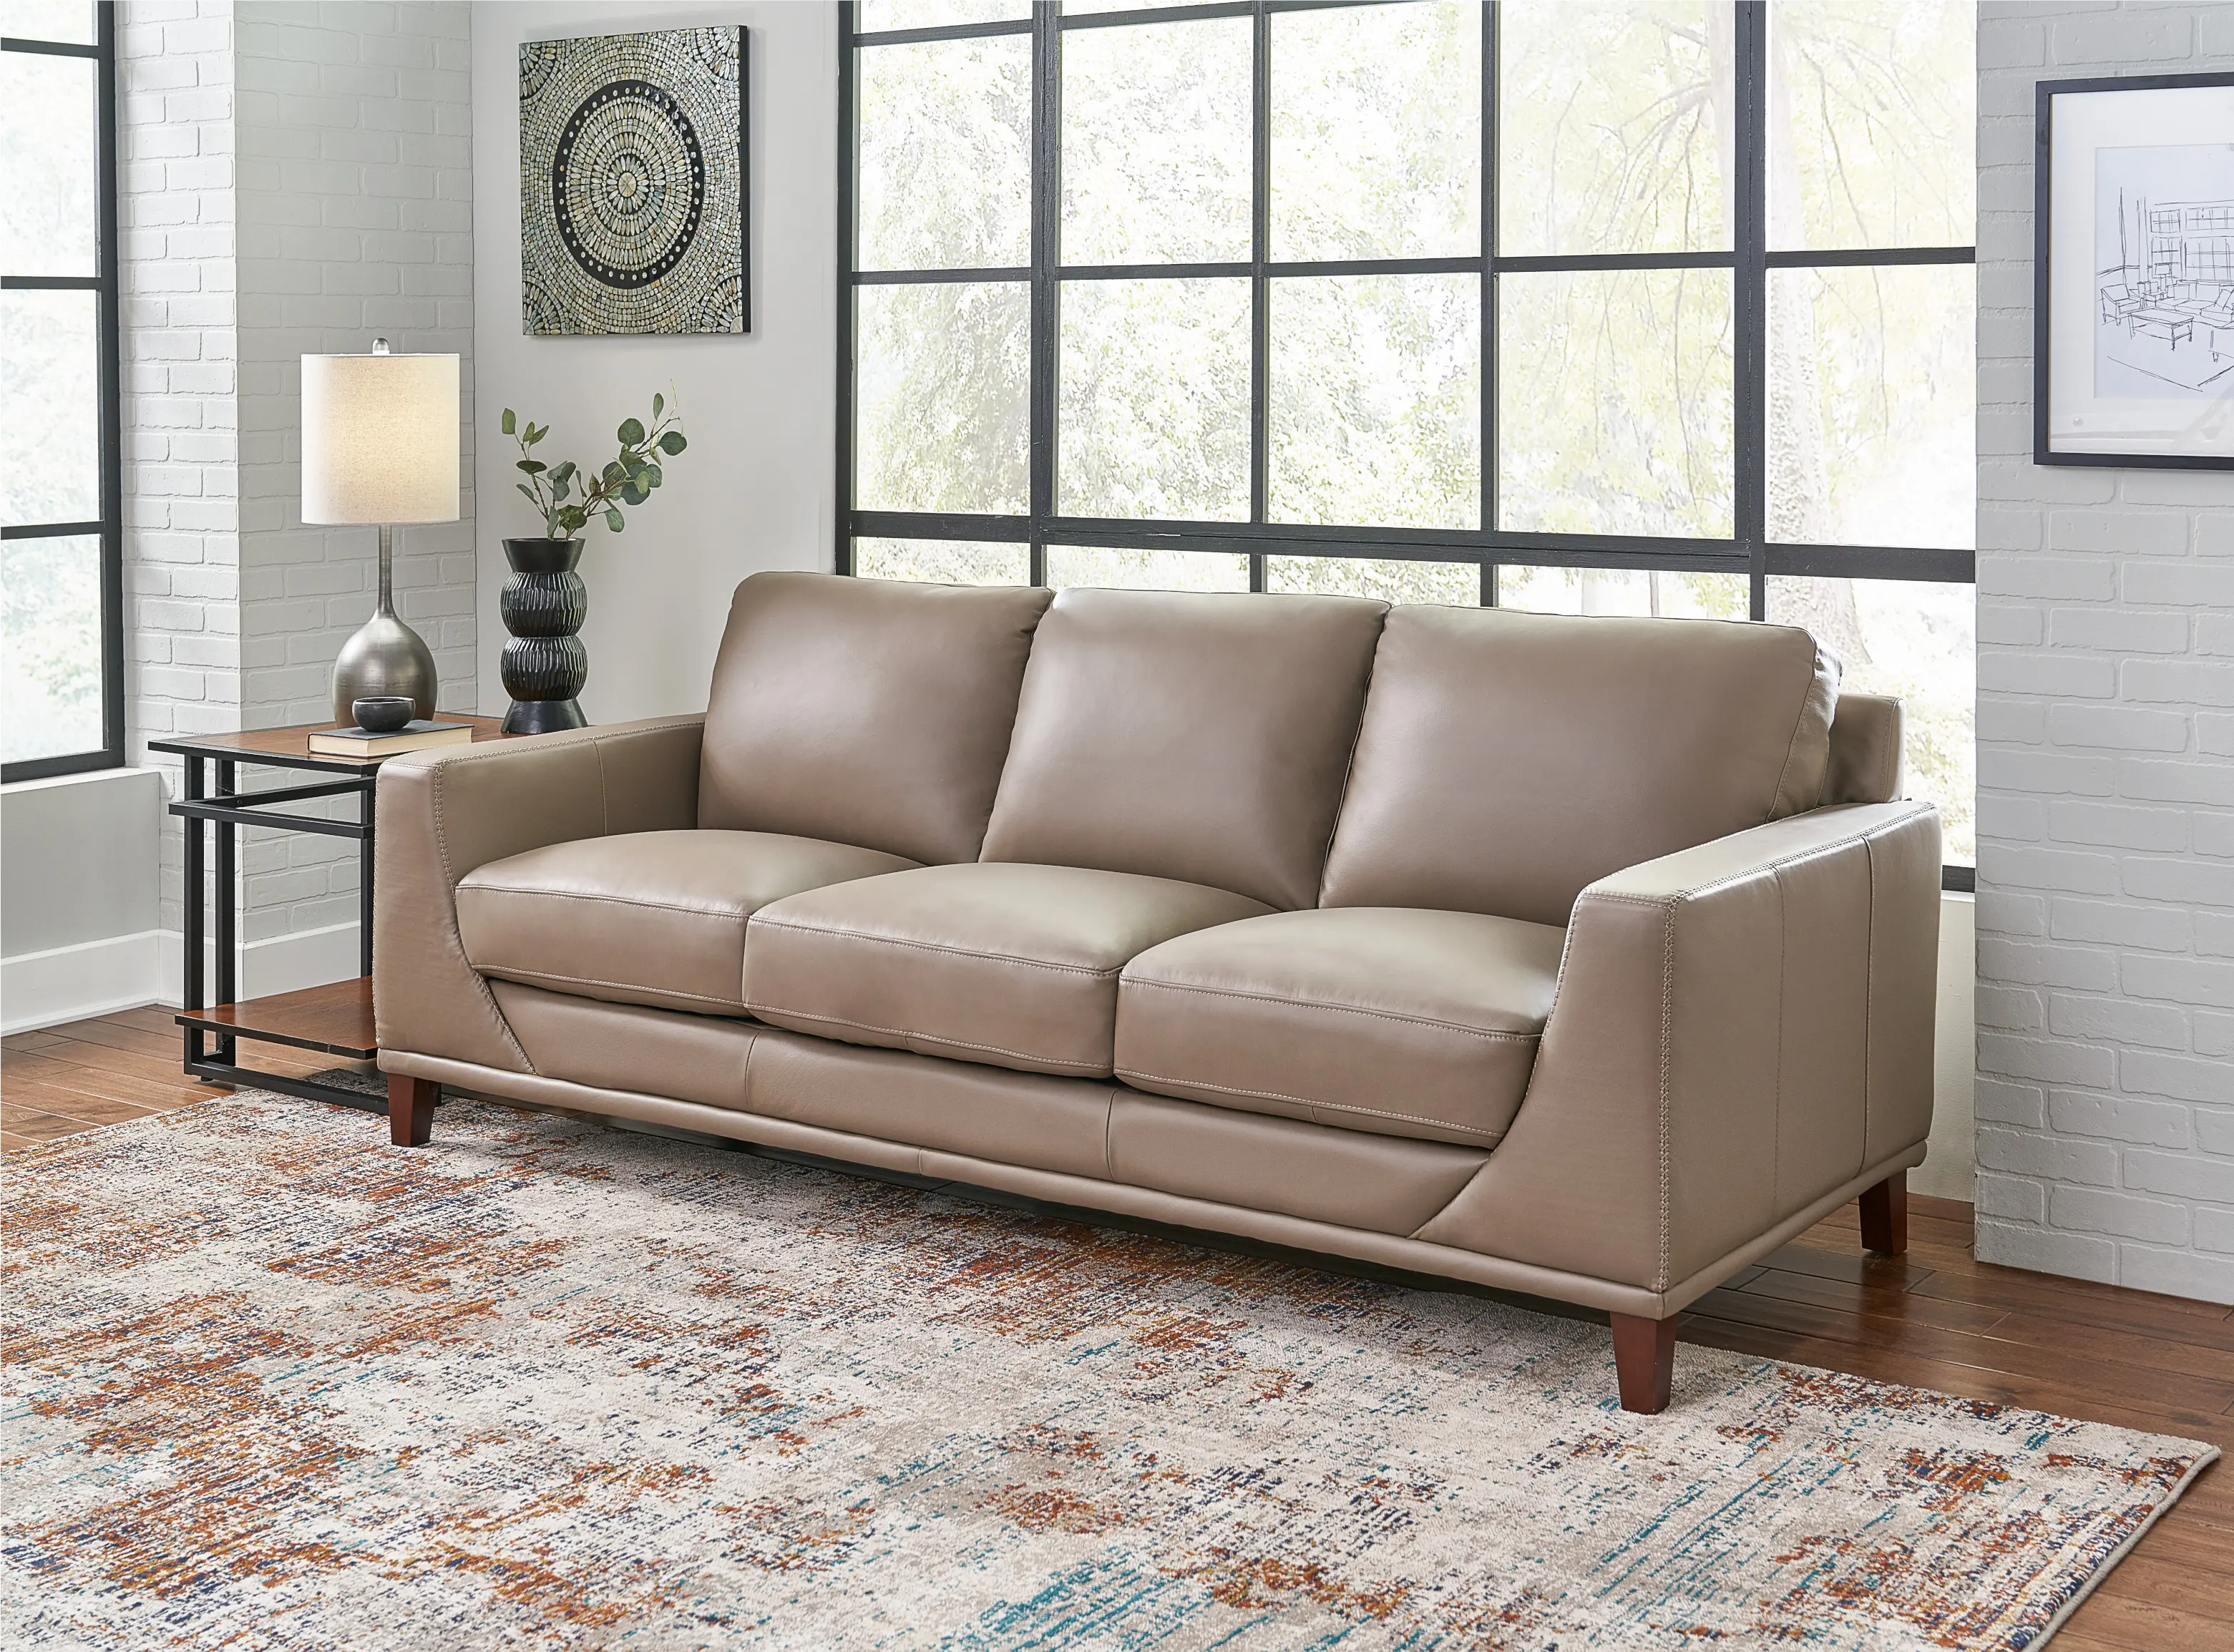 Sonoma Taupe Leather Sofa Rc Willey